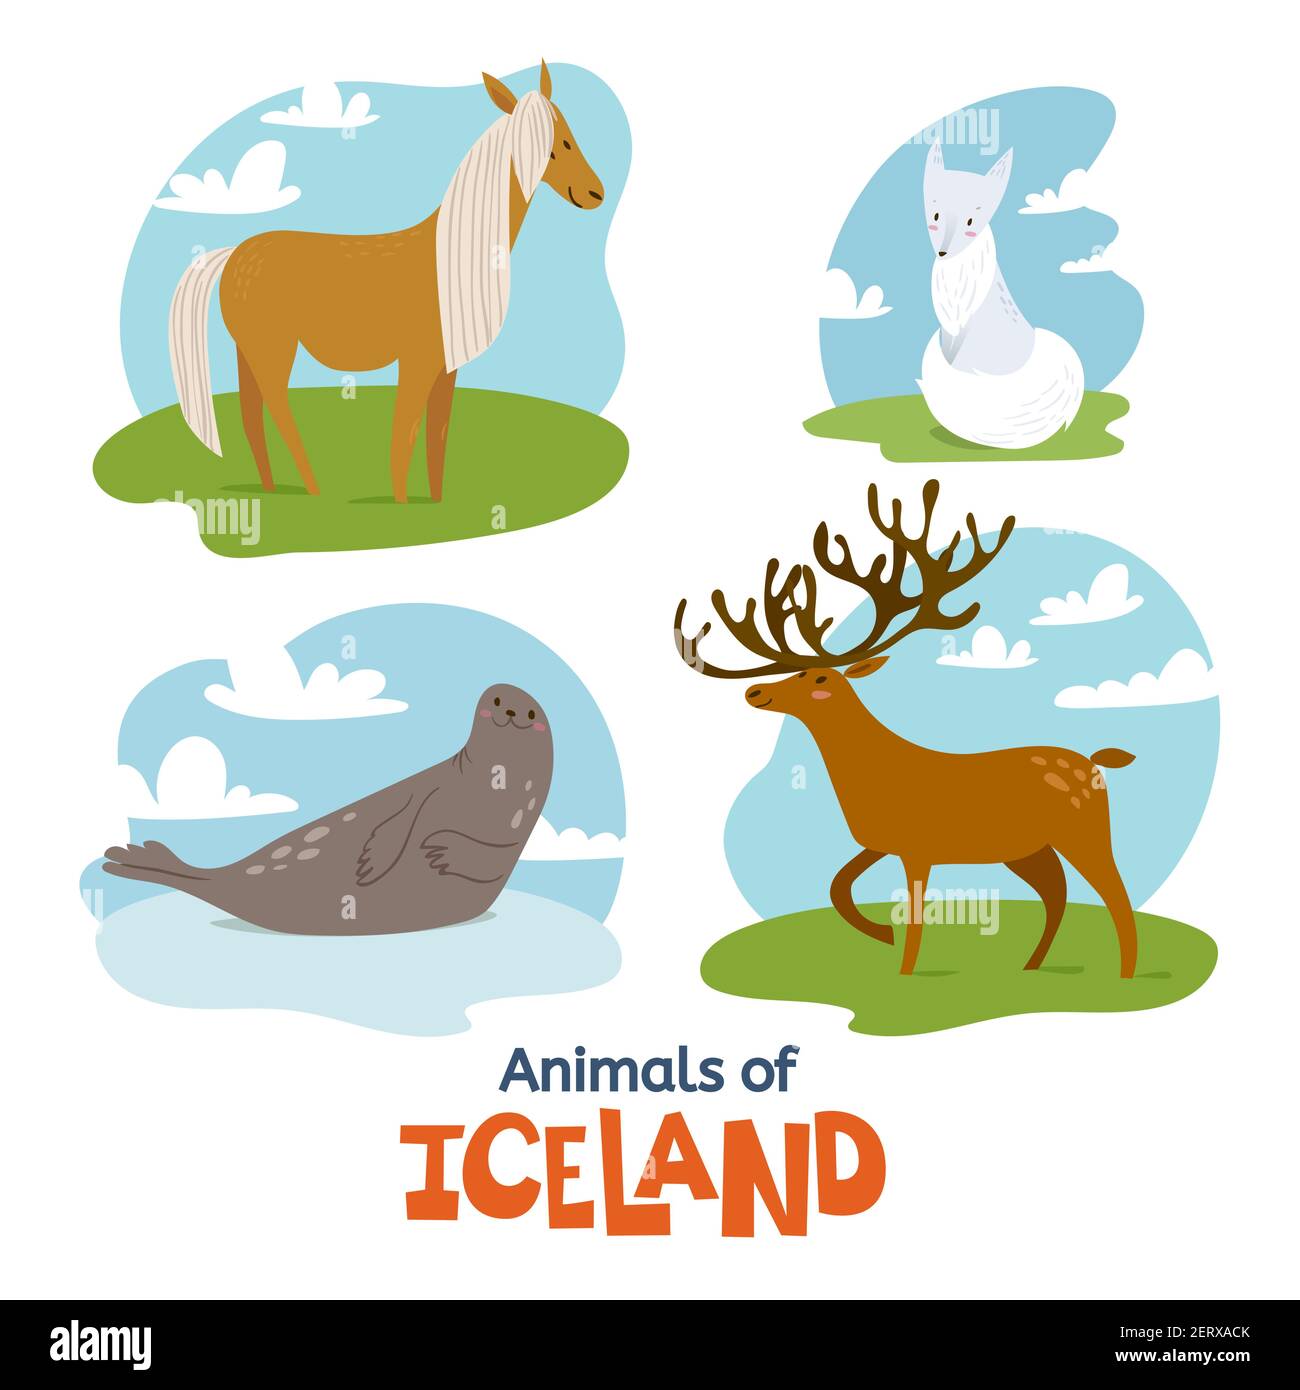 Animals of Iceland in flat modern style design Stock Vector